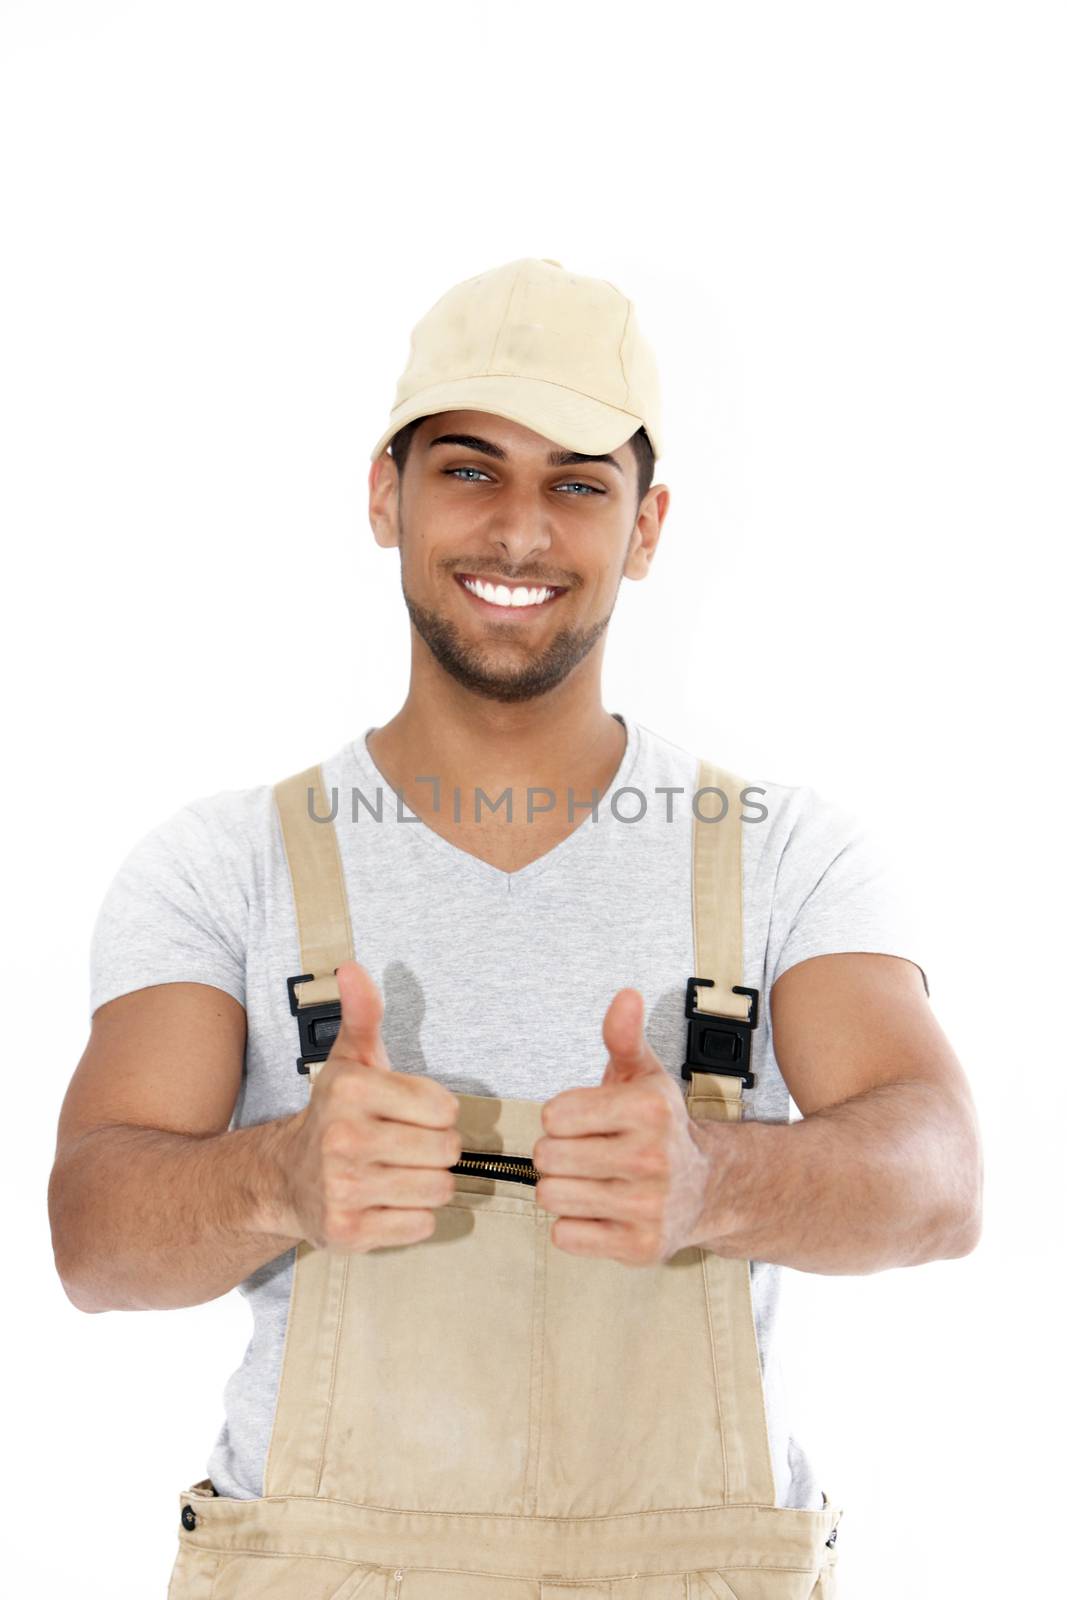 Handsome handyman with a big friendly smile giving a thumbs up of approval and success isolated on white